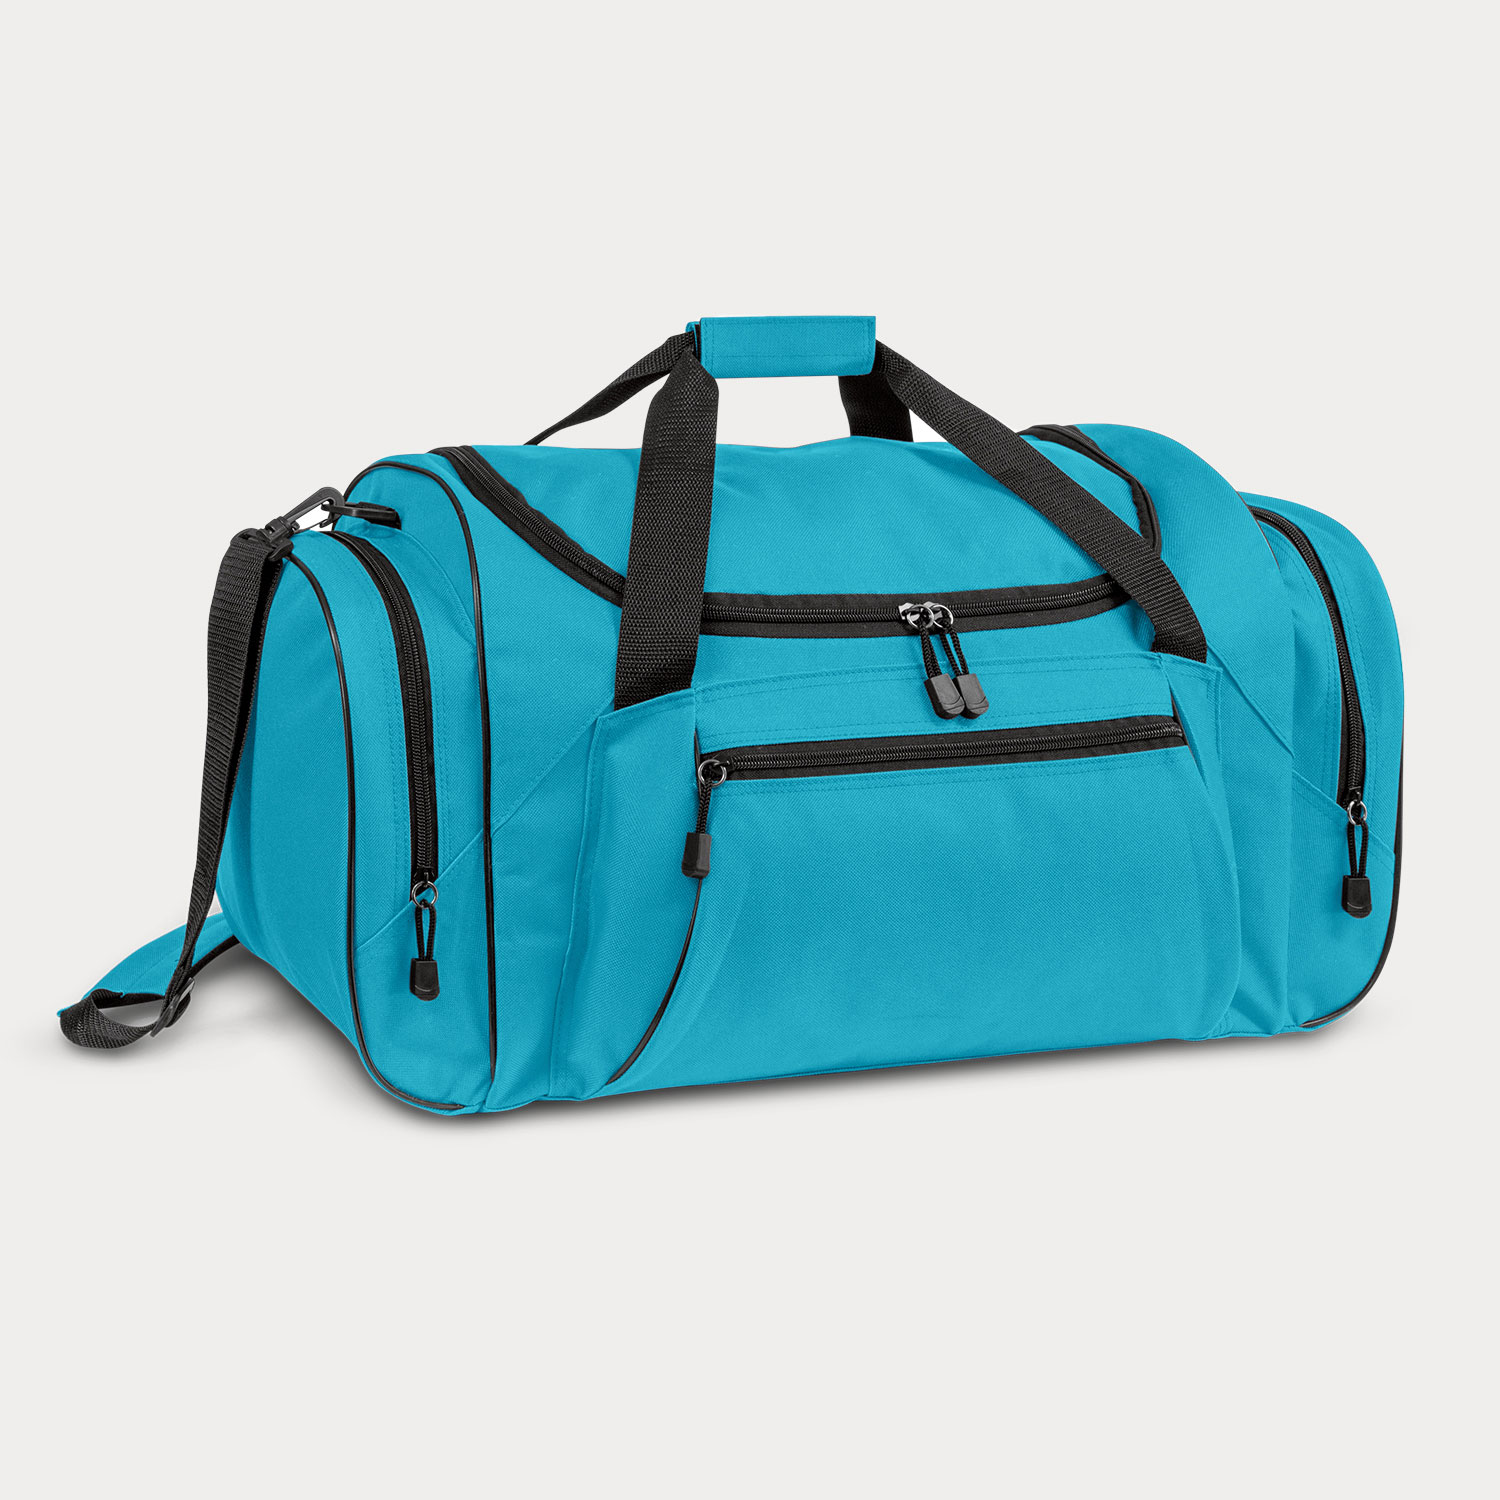 Champion Duffle Bag | PrimoProducts